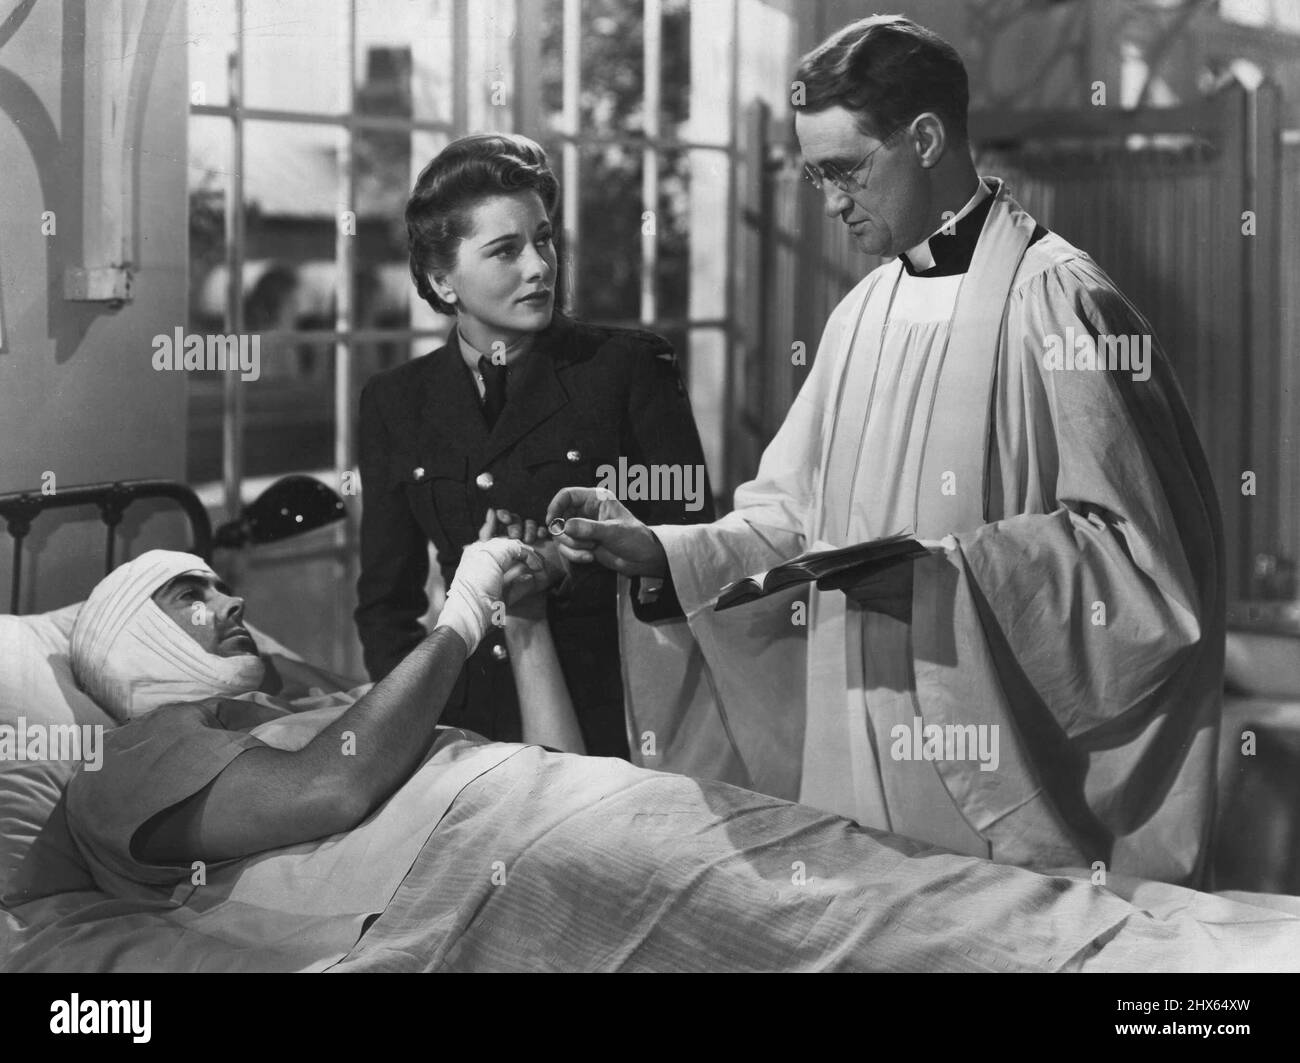 Tyrone Power, Joan Fontaine, in 'This Above All' with Thomas Mitchell, Henry Stephenson, Nigel Bruce, Gladys Cooper, Philip Merivale, Sara Allgood, Alexander Knox Produced by Darryl F. Zanuck. October 31, 1947. (Photo by A Twentieth Century Fox Pictures). Stock Photo